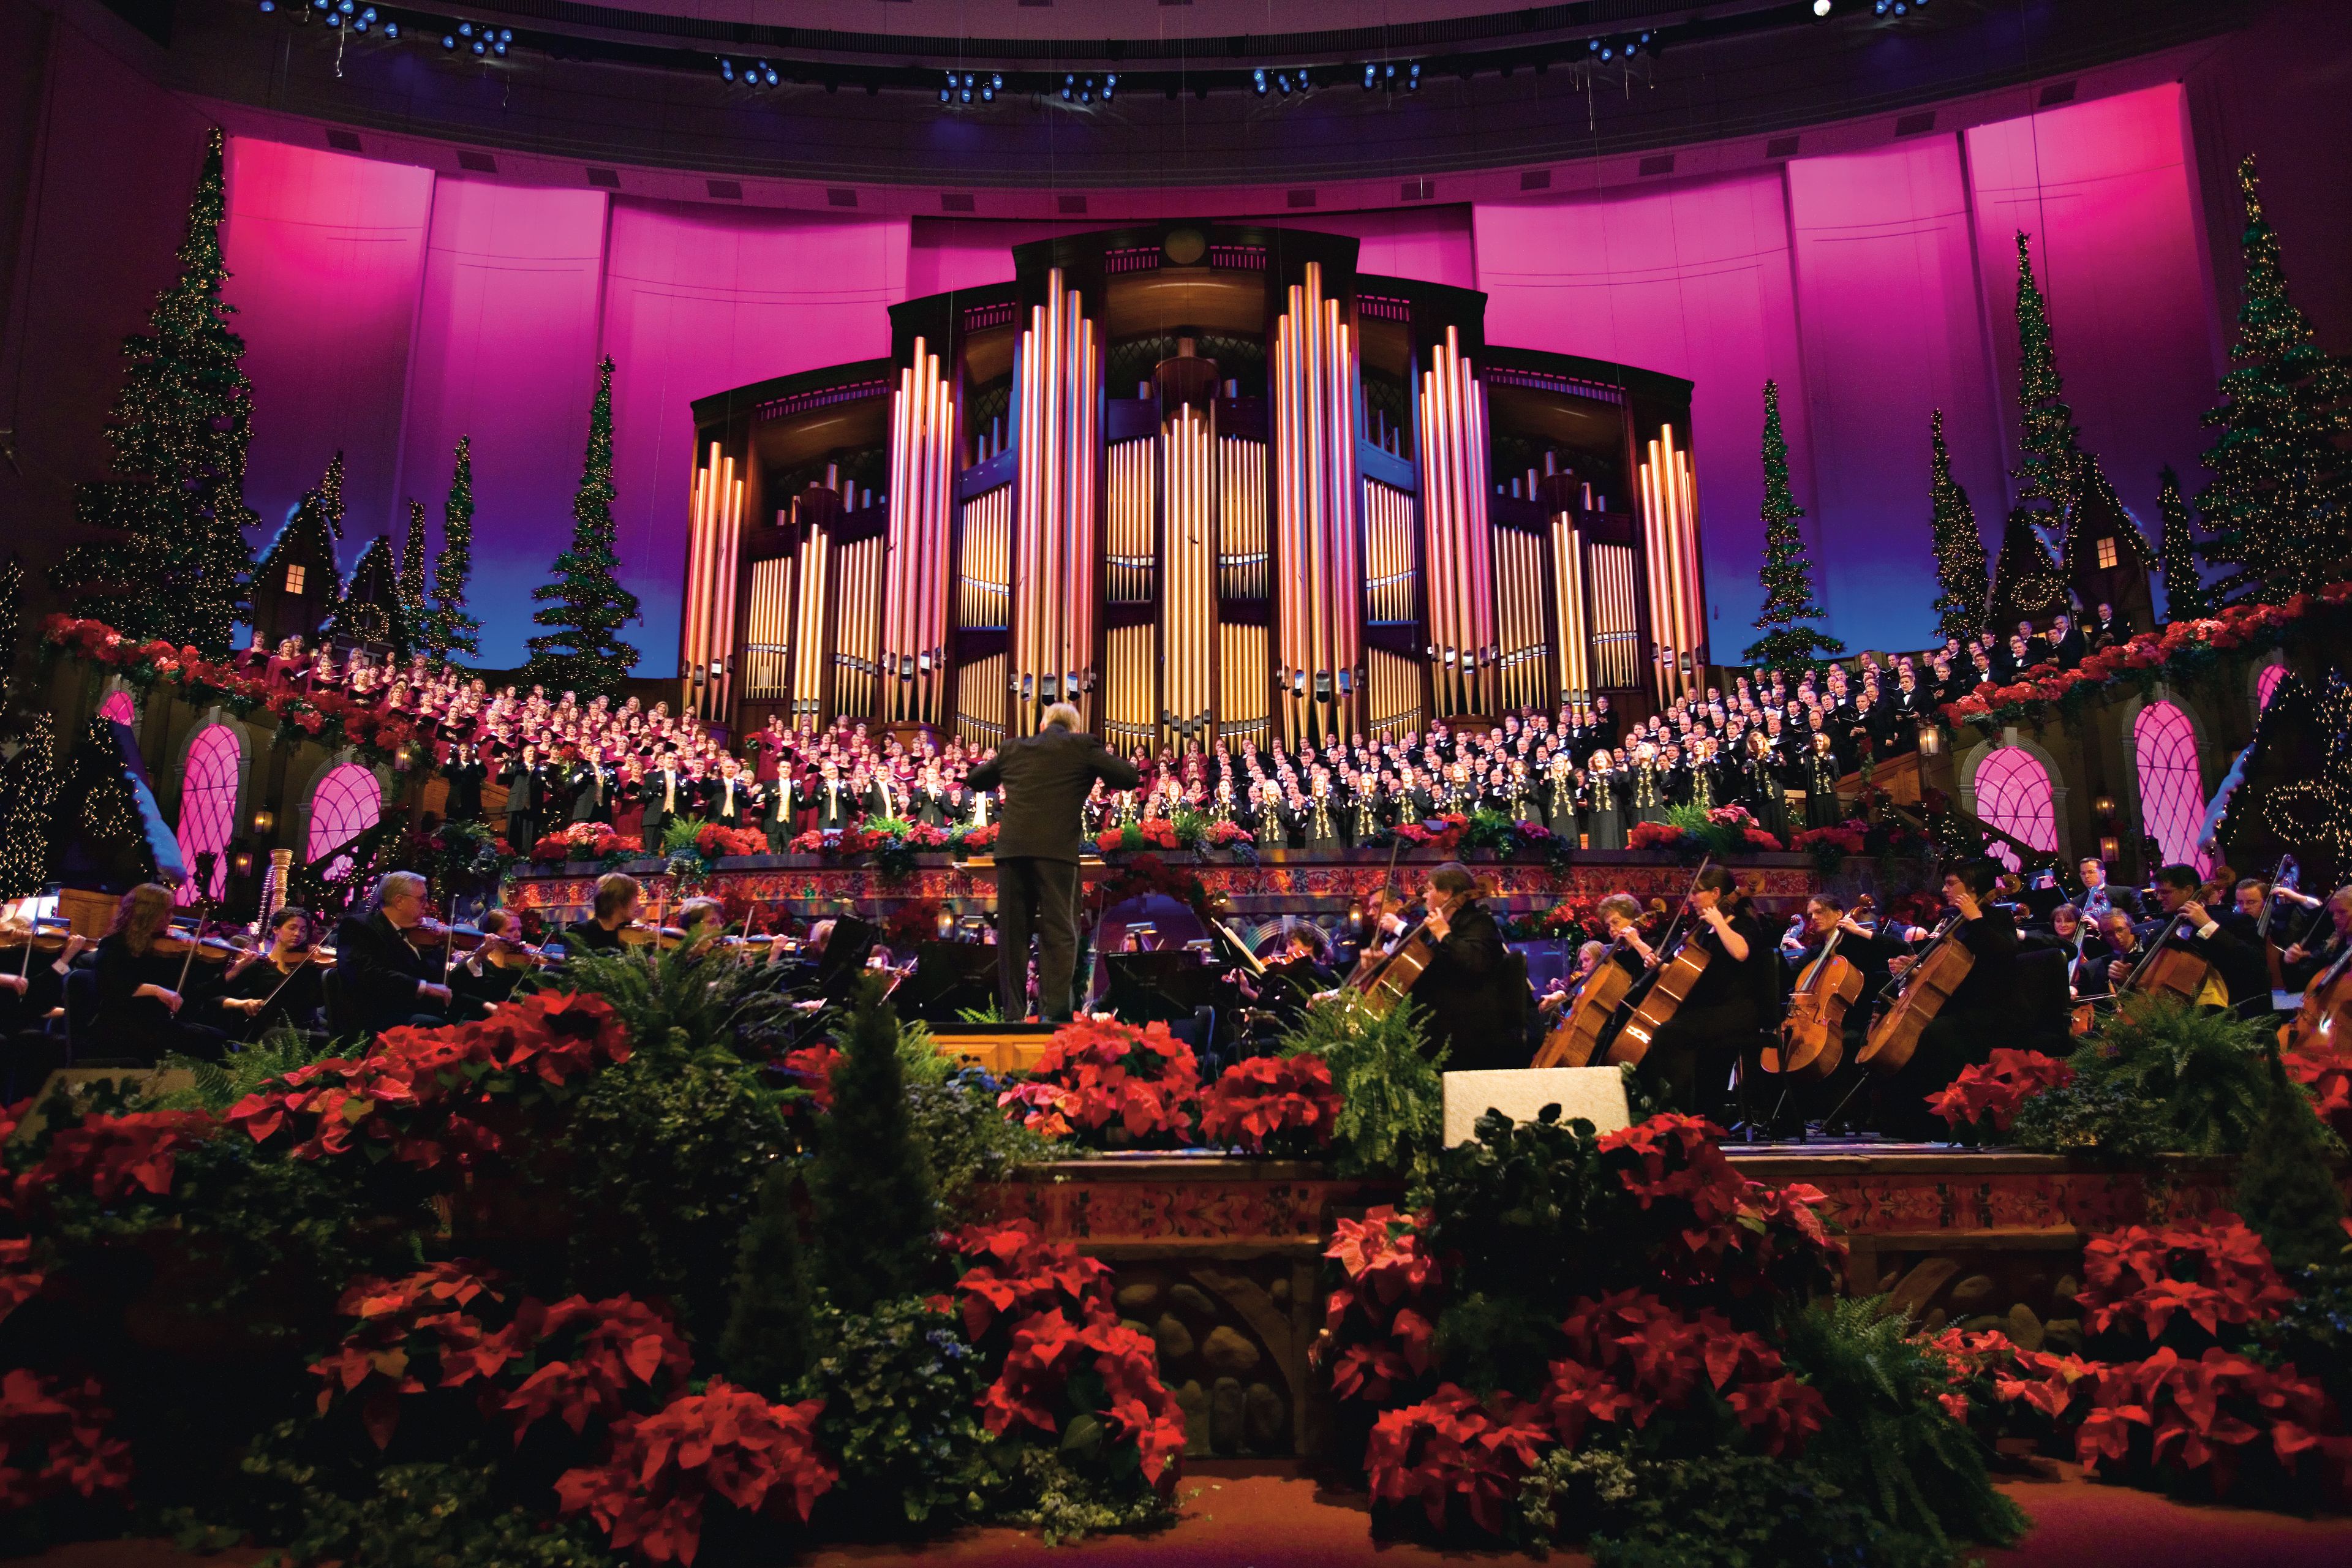 The Mormon Tabernacle Choir Christmas concert in the Conference Center.